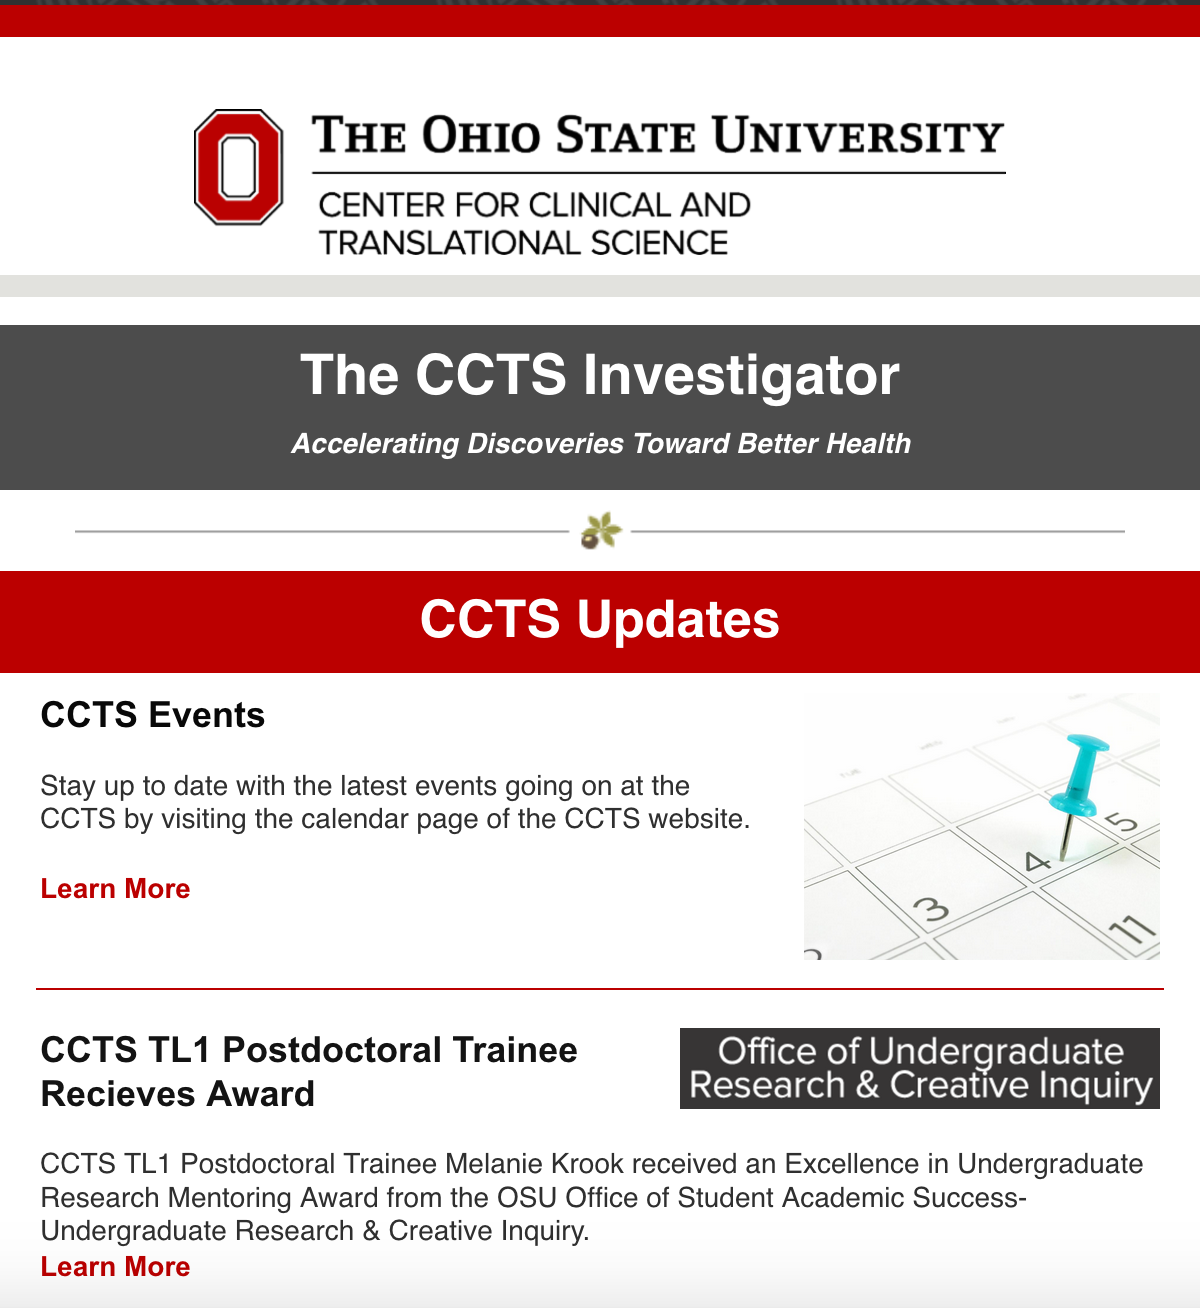 CCTS Investigator: May 2020